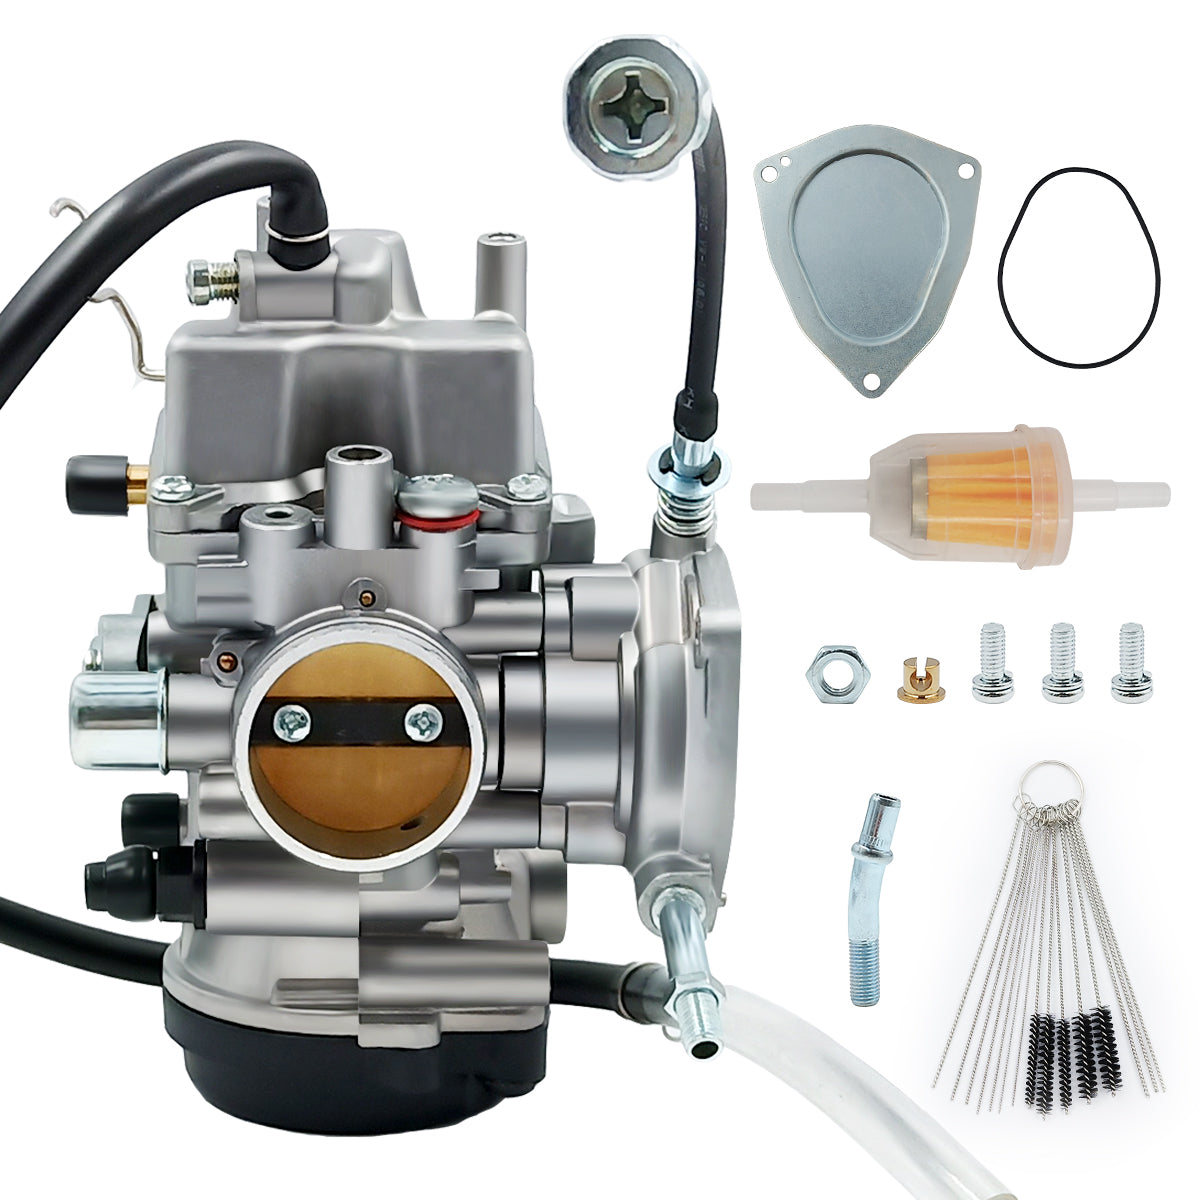 Triumilynn Carburetor for Yamaha 250 350 400 450 Kodiak Big Bear Grizzly Wolverine 2000-2014 YFM400 450 4X4 4WD ATV Carb Kit (come with cleaning tools and fuel filter)